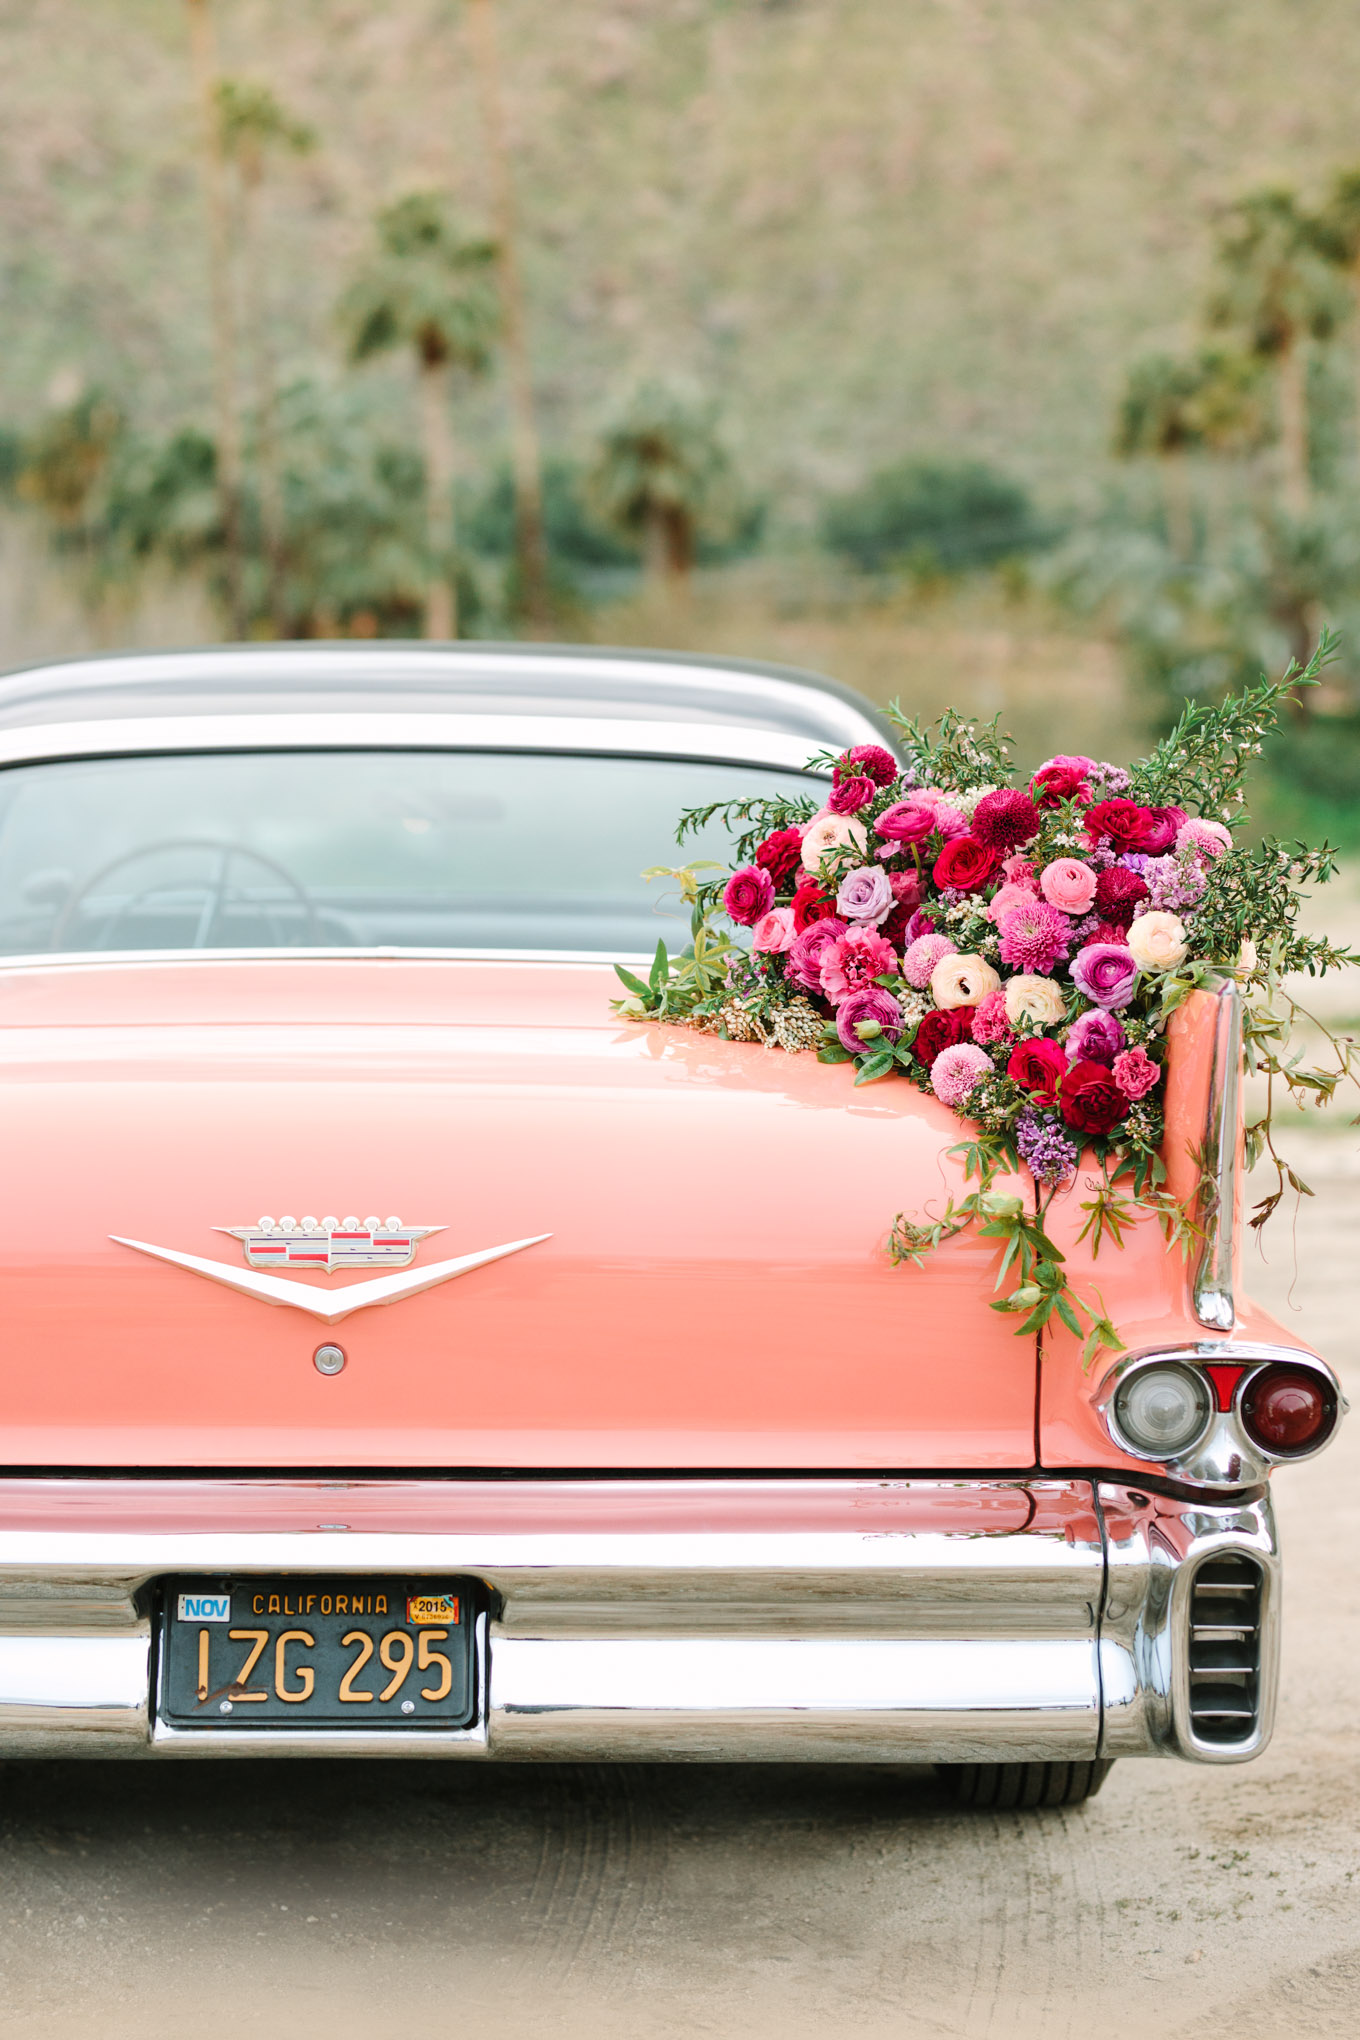 Flower detail on back of coral classic car. Modern vintage-inspired Palm Springs engagement session with a 1960s pink Cadillac, retro clothing, and flowers by Shindig Chic. | Colorful and elevated wedding inspiration for fun-loving couples in Southern California | #engagementsession #PalmSpringsengagement #vintageweddingdress #floralcar #pinkcar   Source: Mary Costa Photography | Los Angeles 